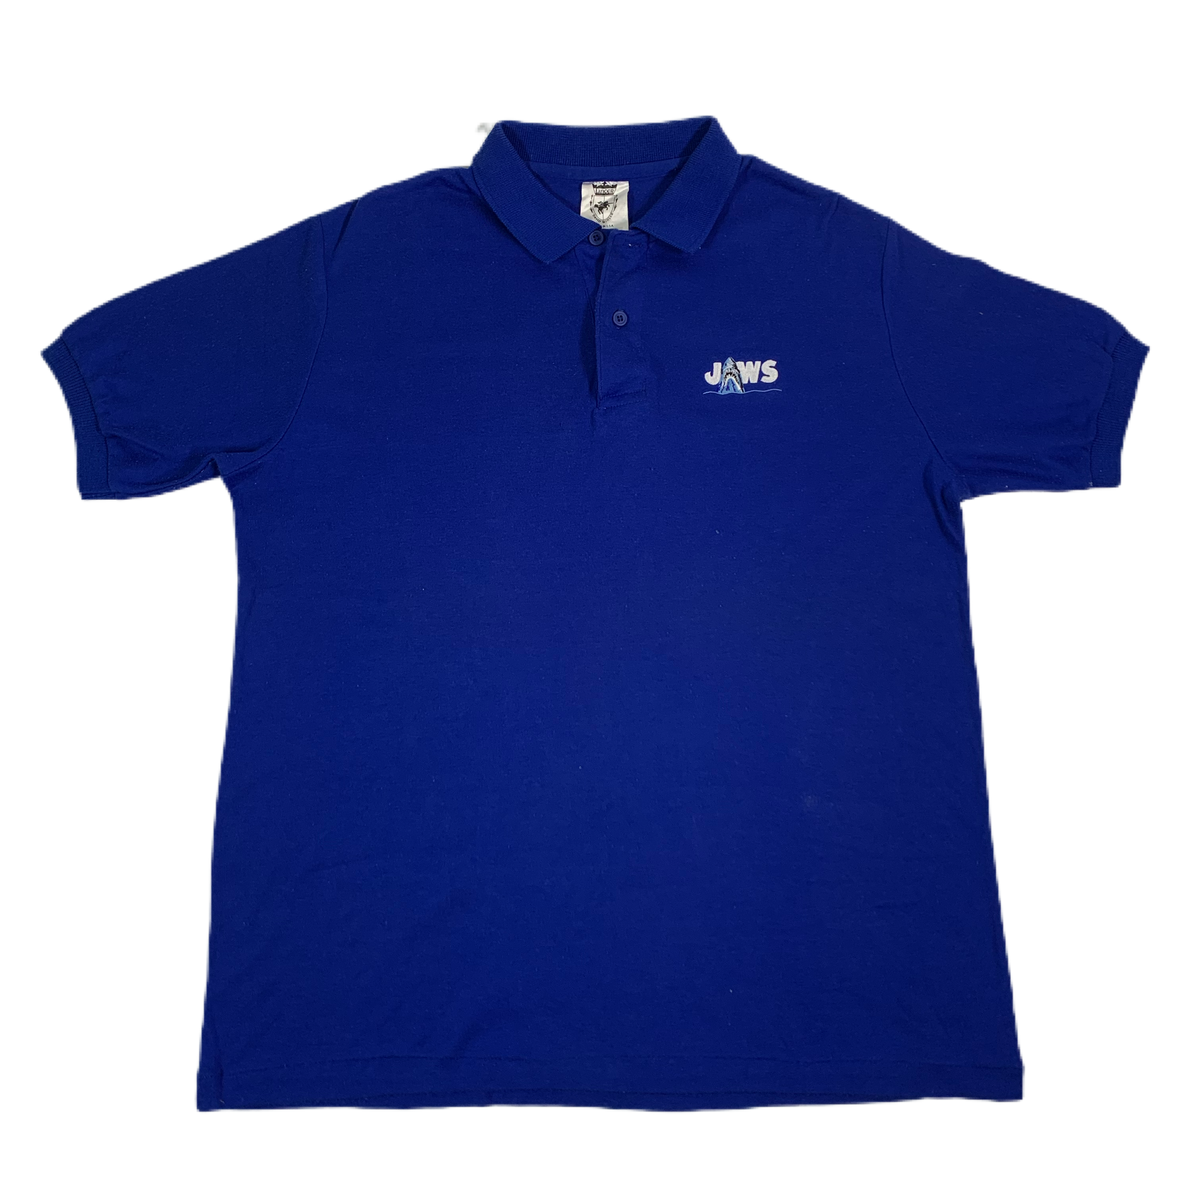 Vintage Jaws “Embroidered” Polo Shirt - jointcustodydc